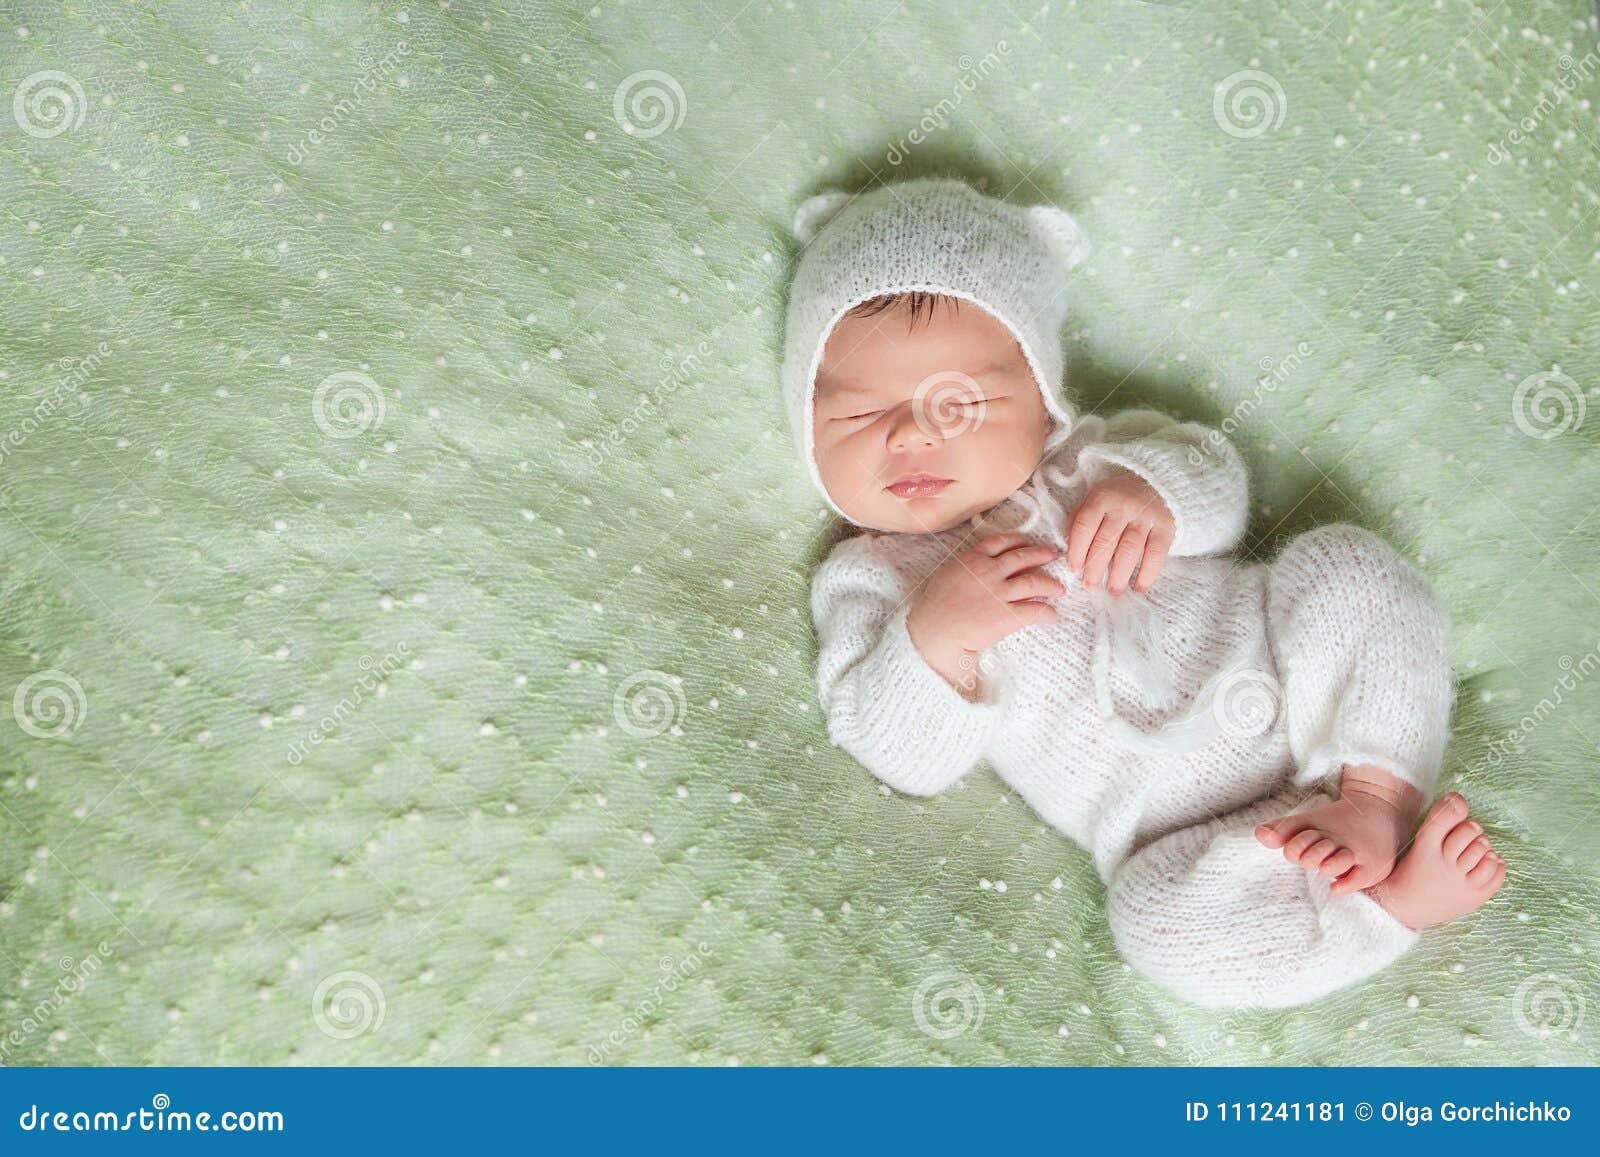 Cute Sleeping Newborn Baby in White Knitted Fluffy Kitten Costume Stock  Image - Image of caucasian, face: 111241181